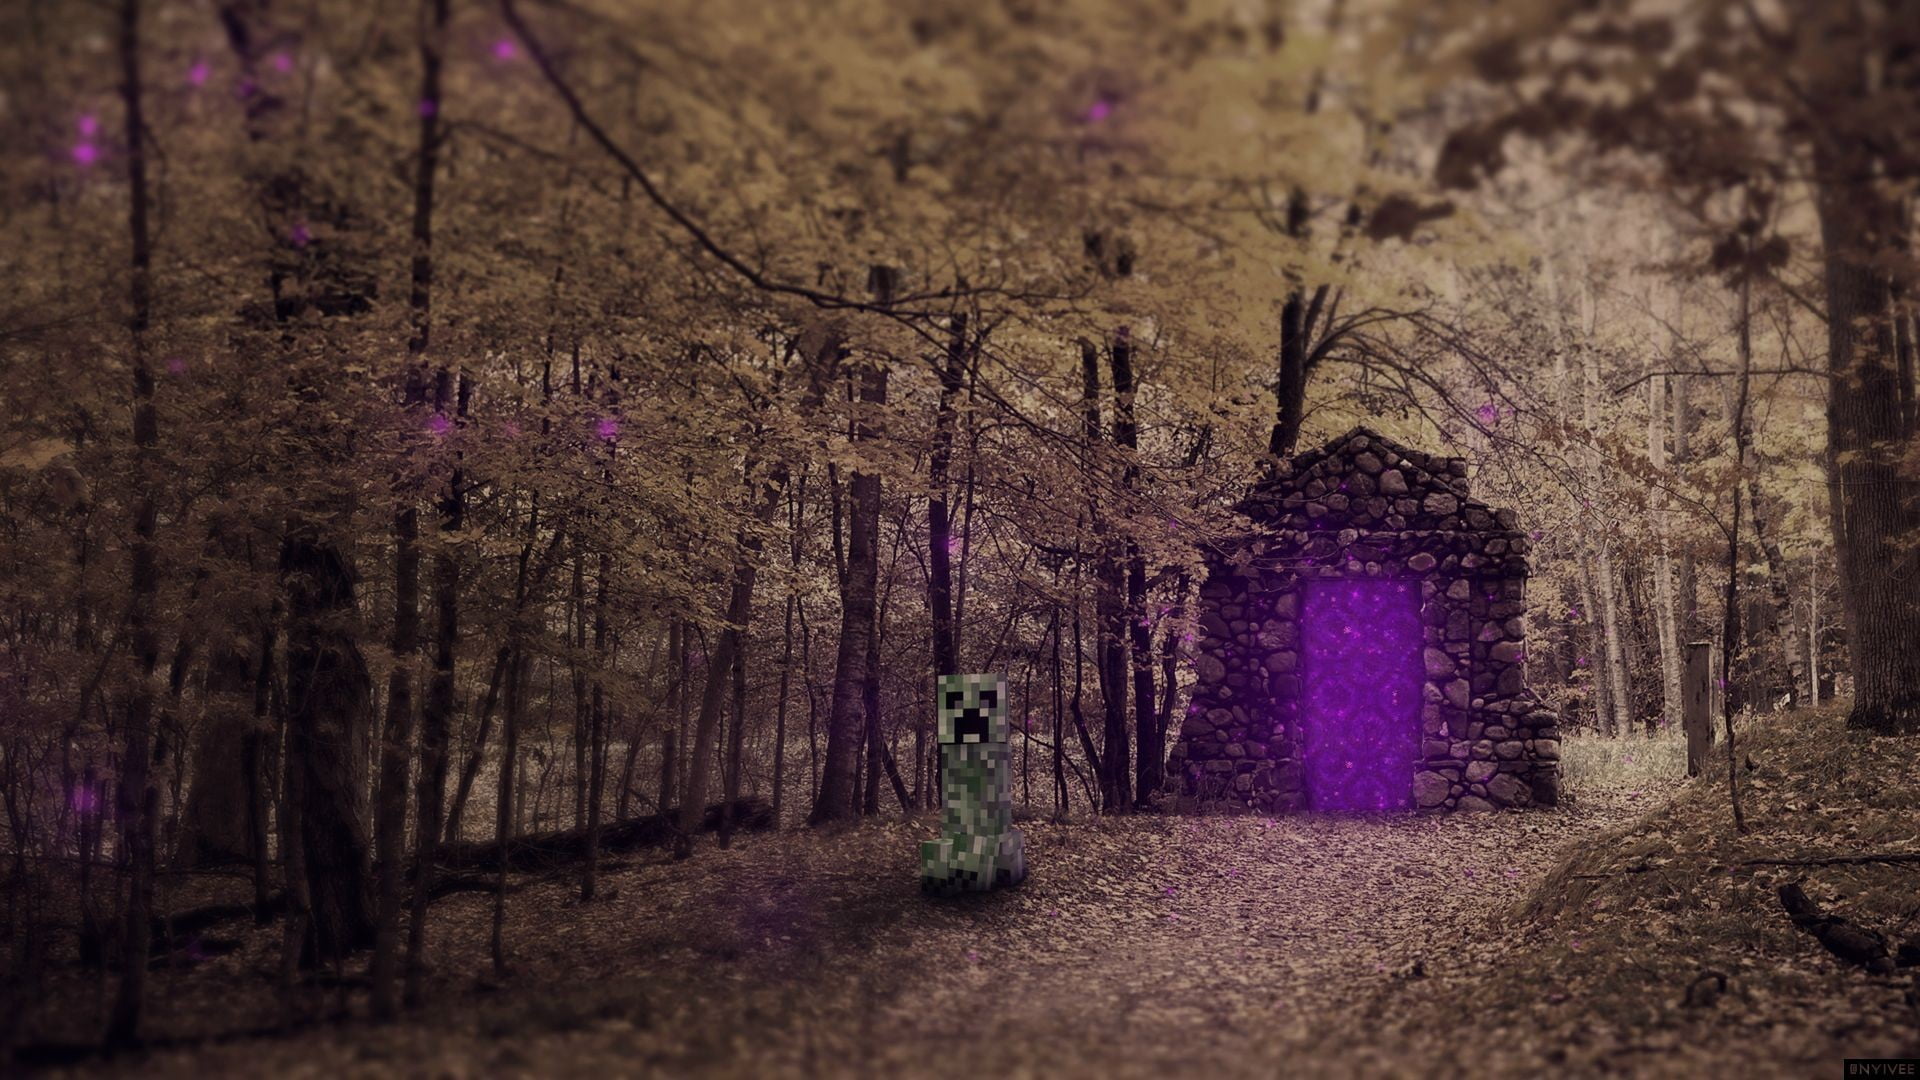 Minecraft Creeper and Portal wallpaper, stone gateway with edited Minecraft creeper on forest photo